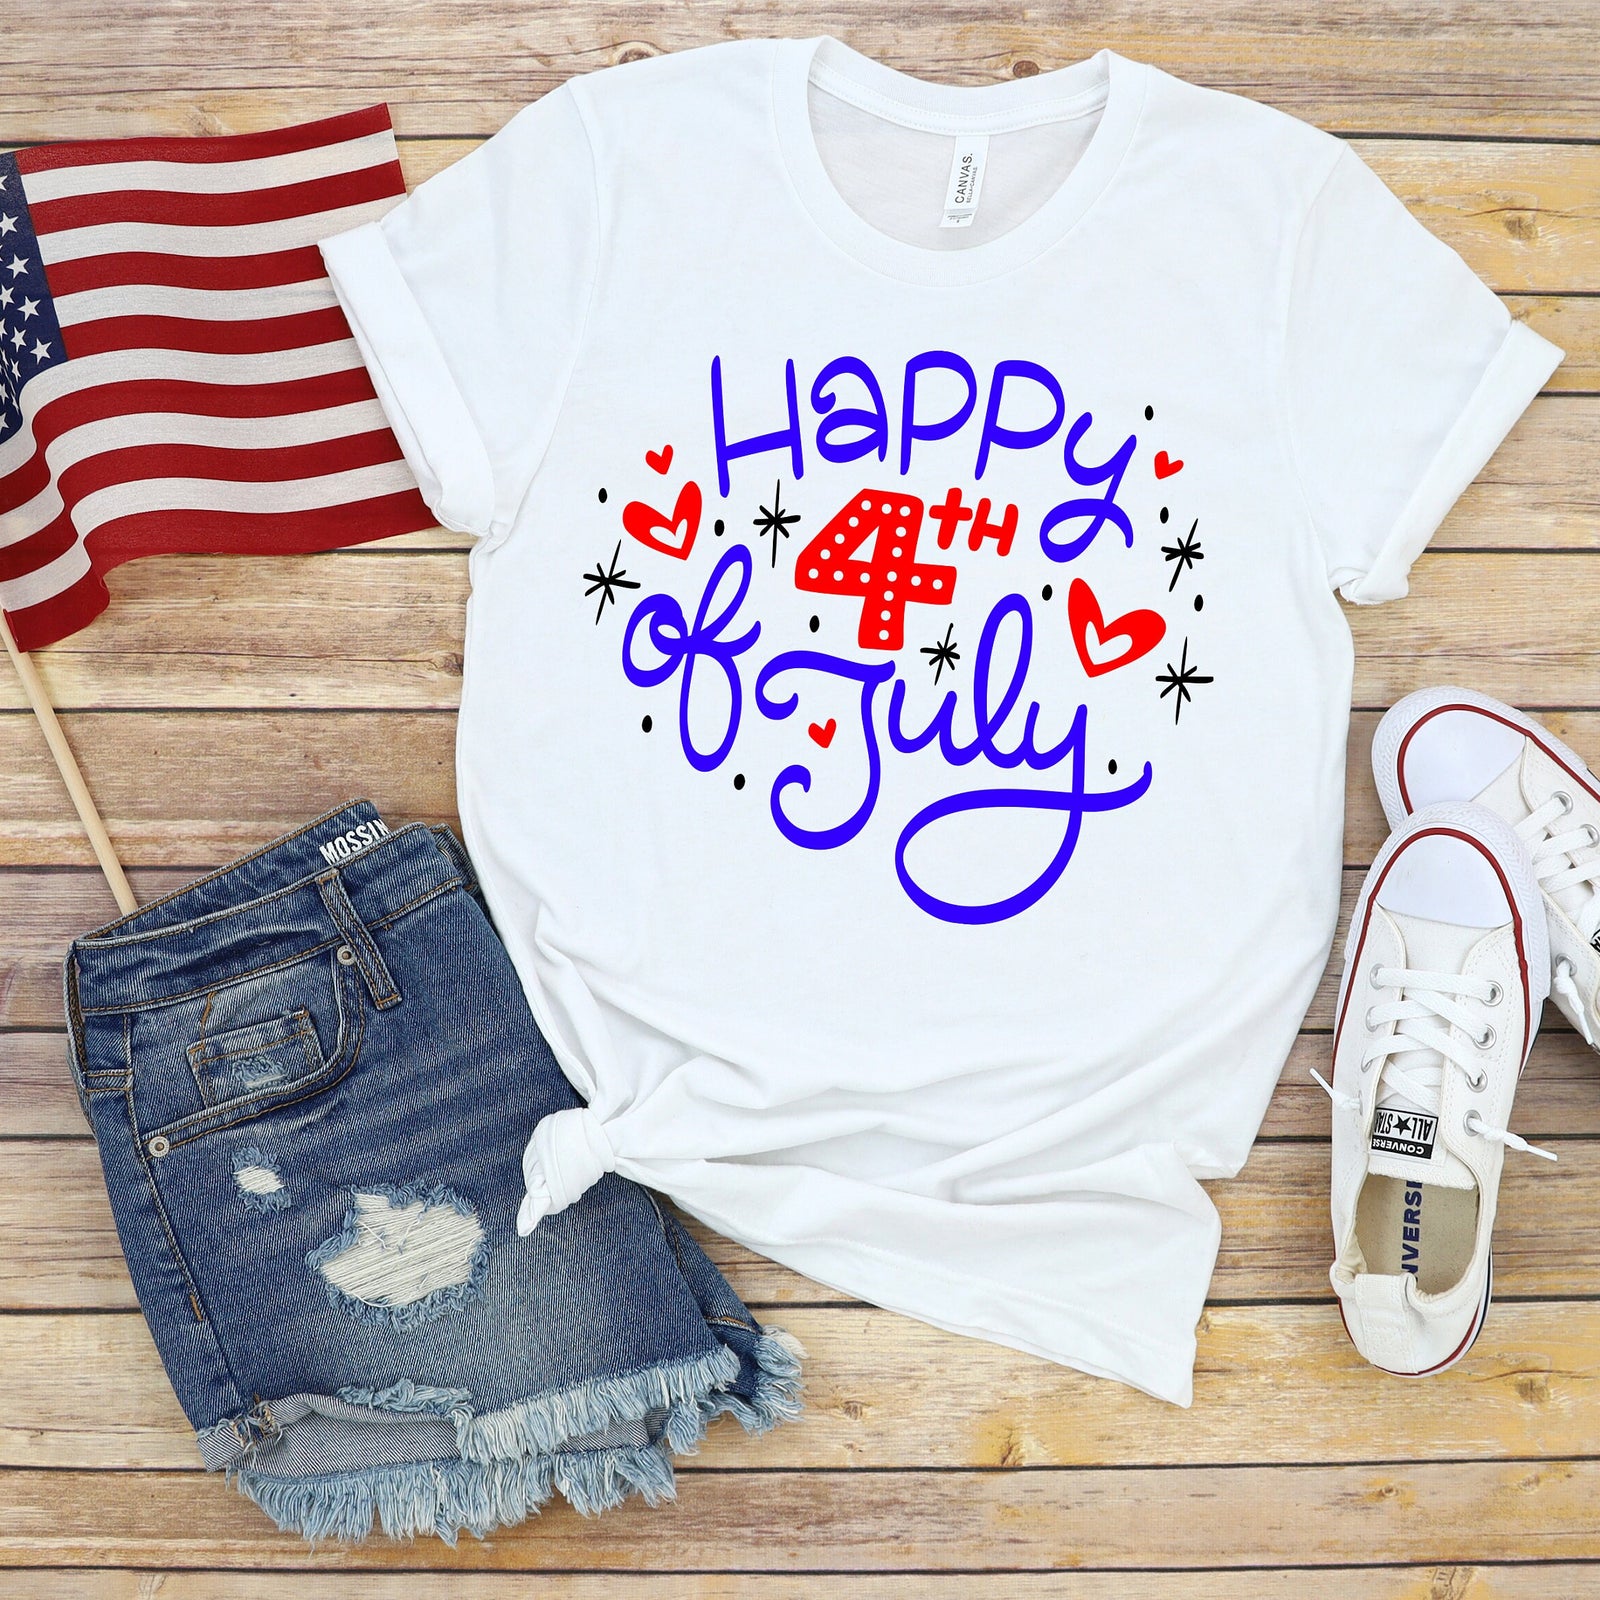 Happy Fourth of July Adult T Shirt - Independence Day - Memorial - Red White and Blue USA